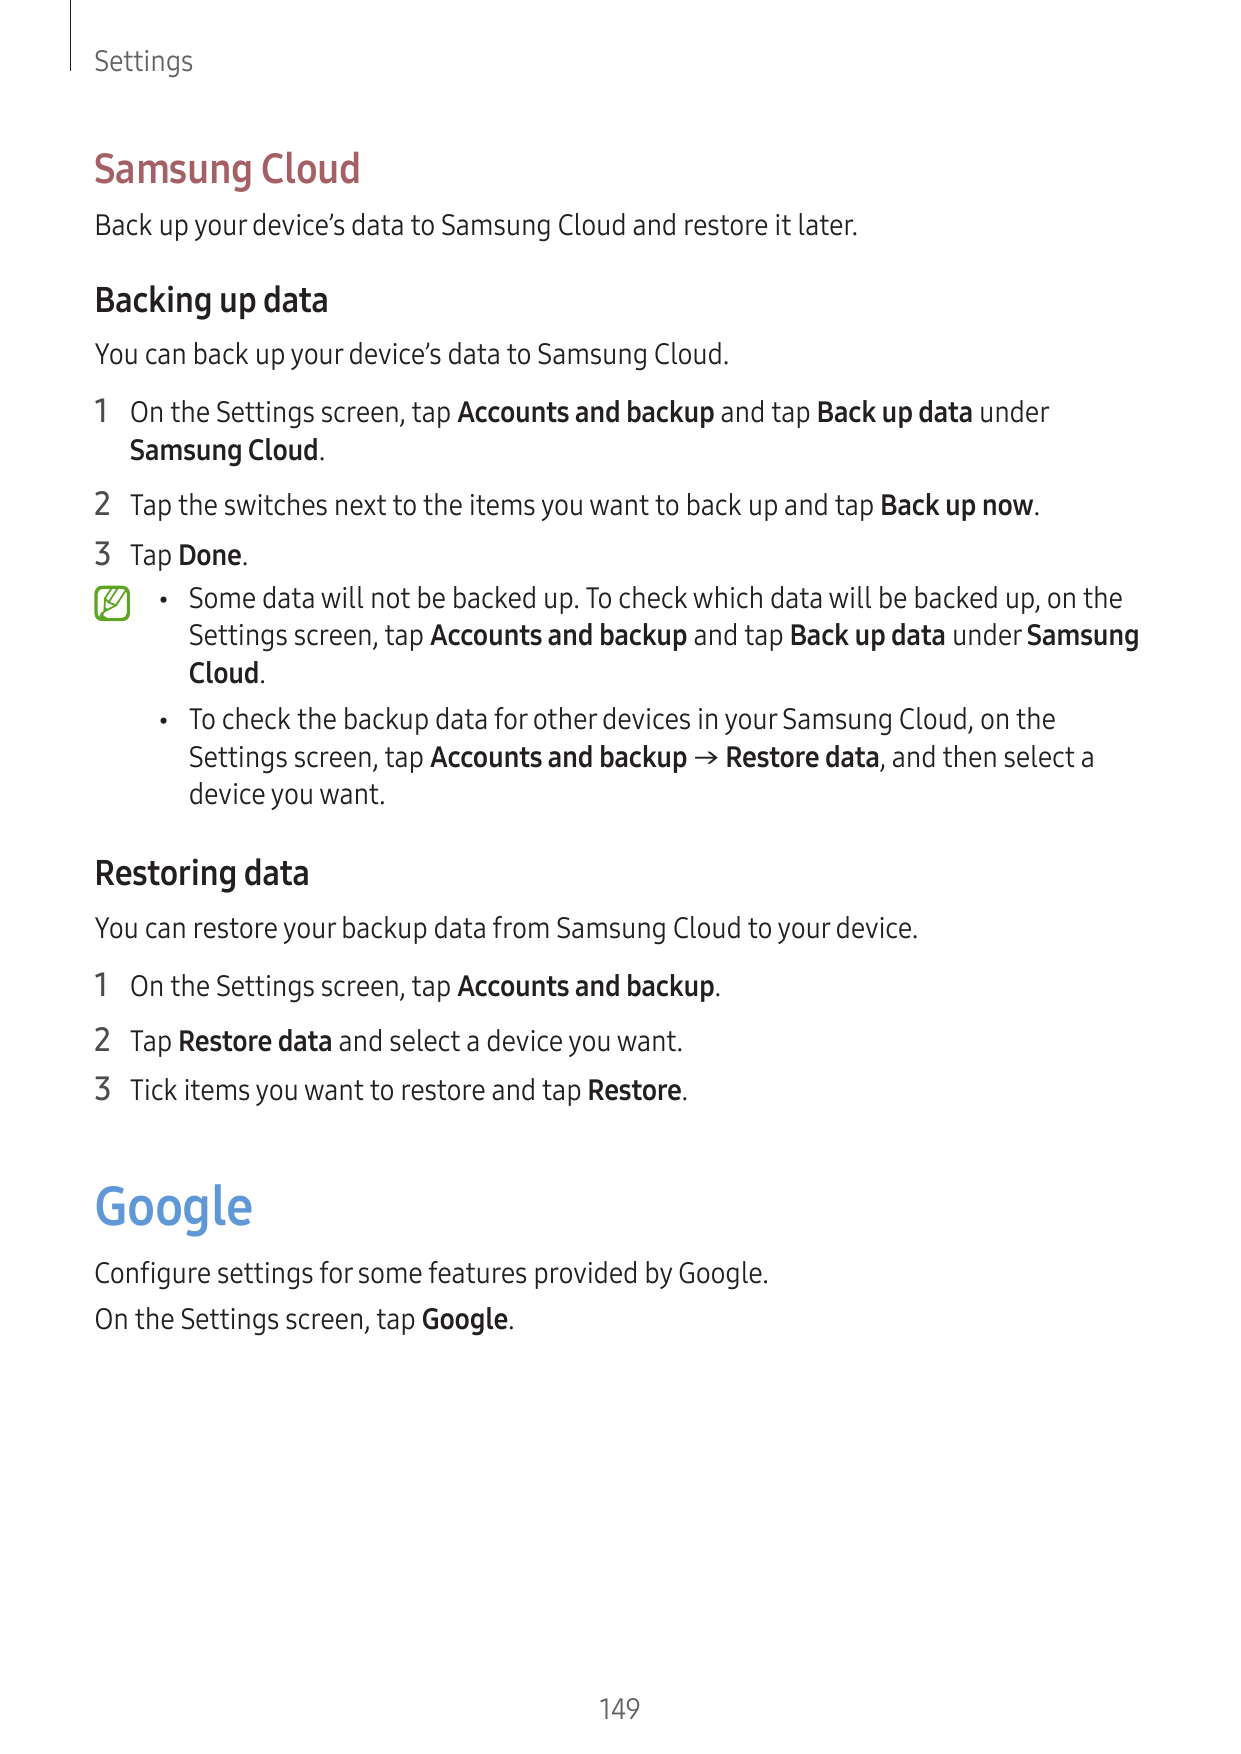 SettingsSamsung CloudBack up your device’s data to Samsung Cloud and restore it later.Backing up dataYou can back up your device